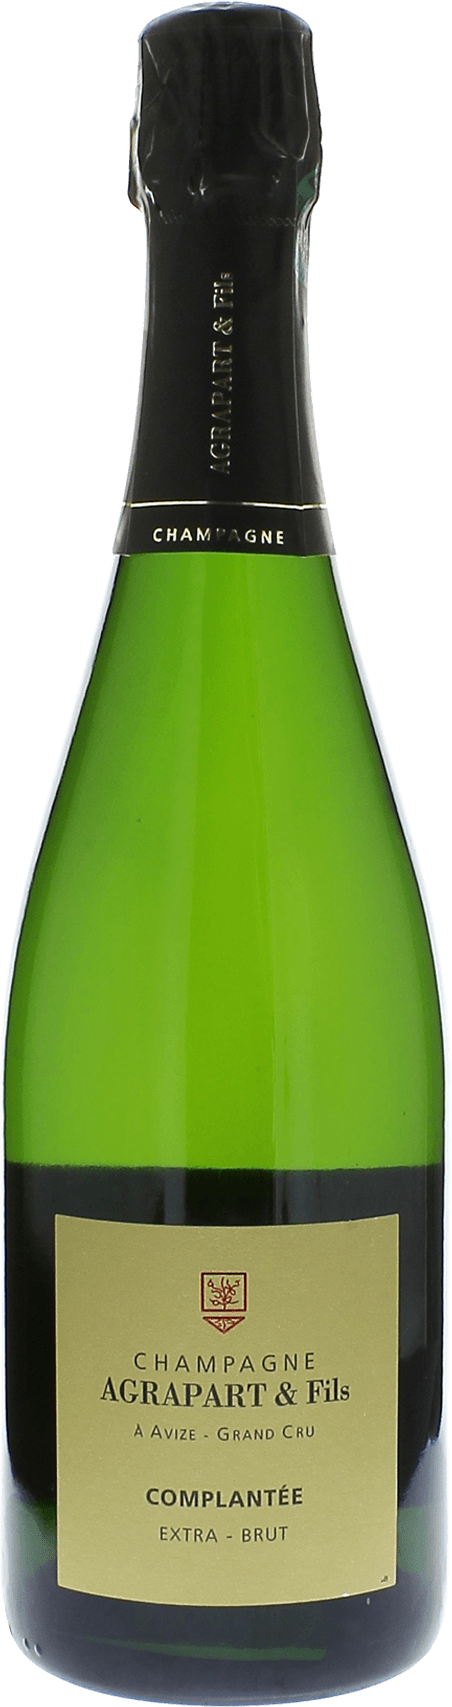 Agrapart  complante extra brut grand cru  Pascal Agrapart, Champagne